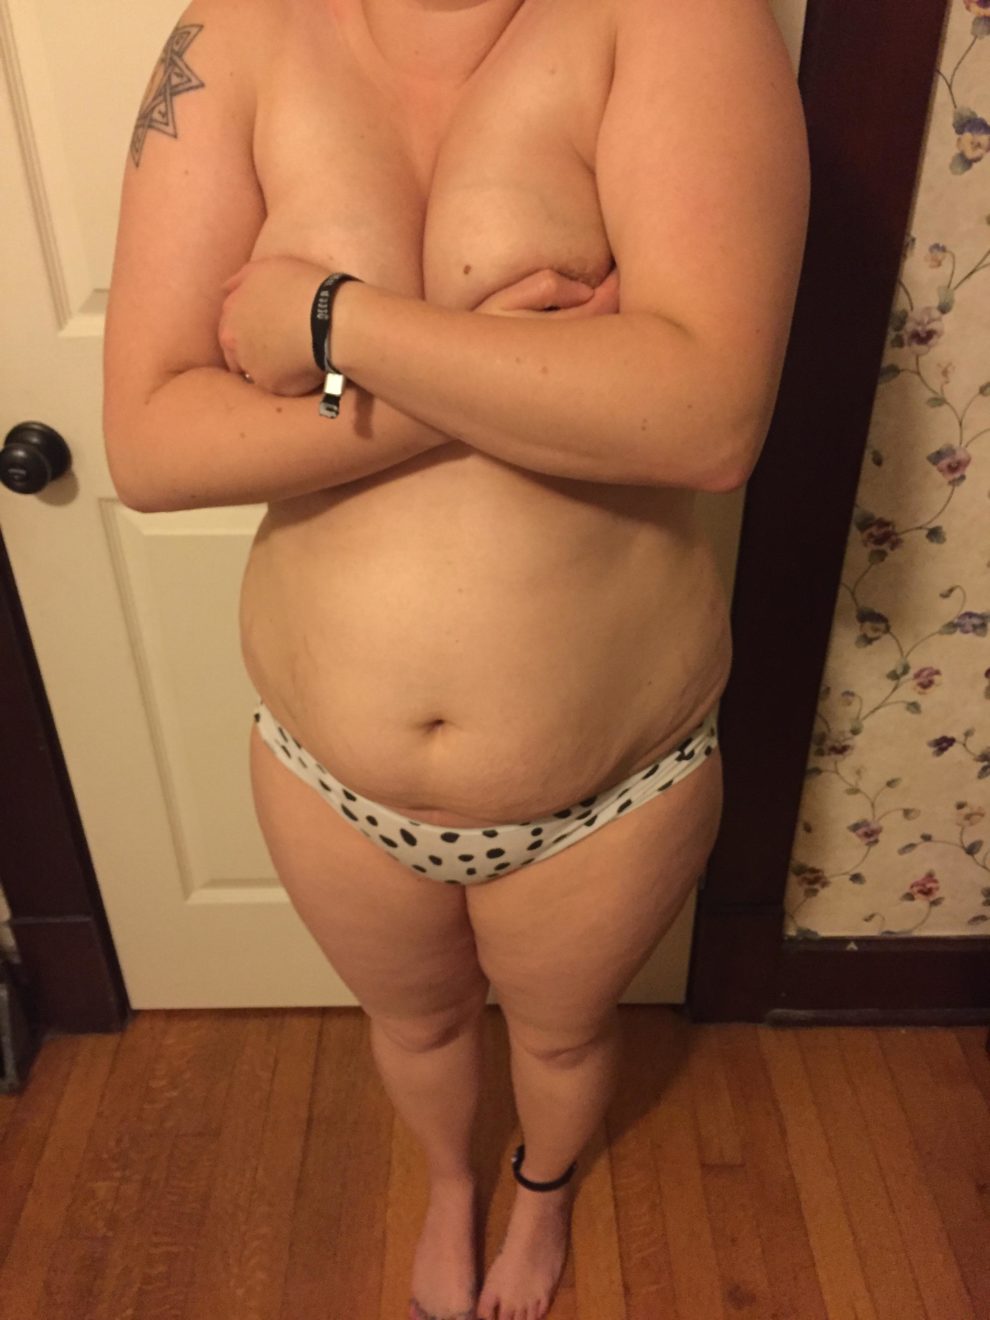 My wife has been working out and wanted to share her progress